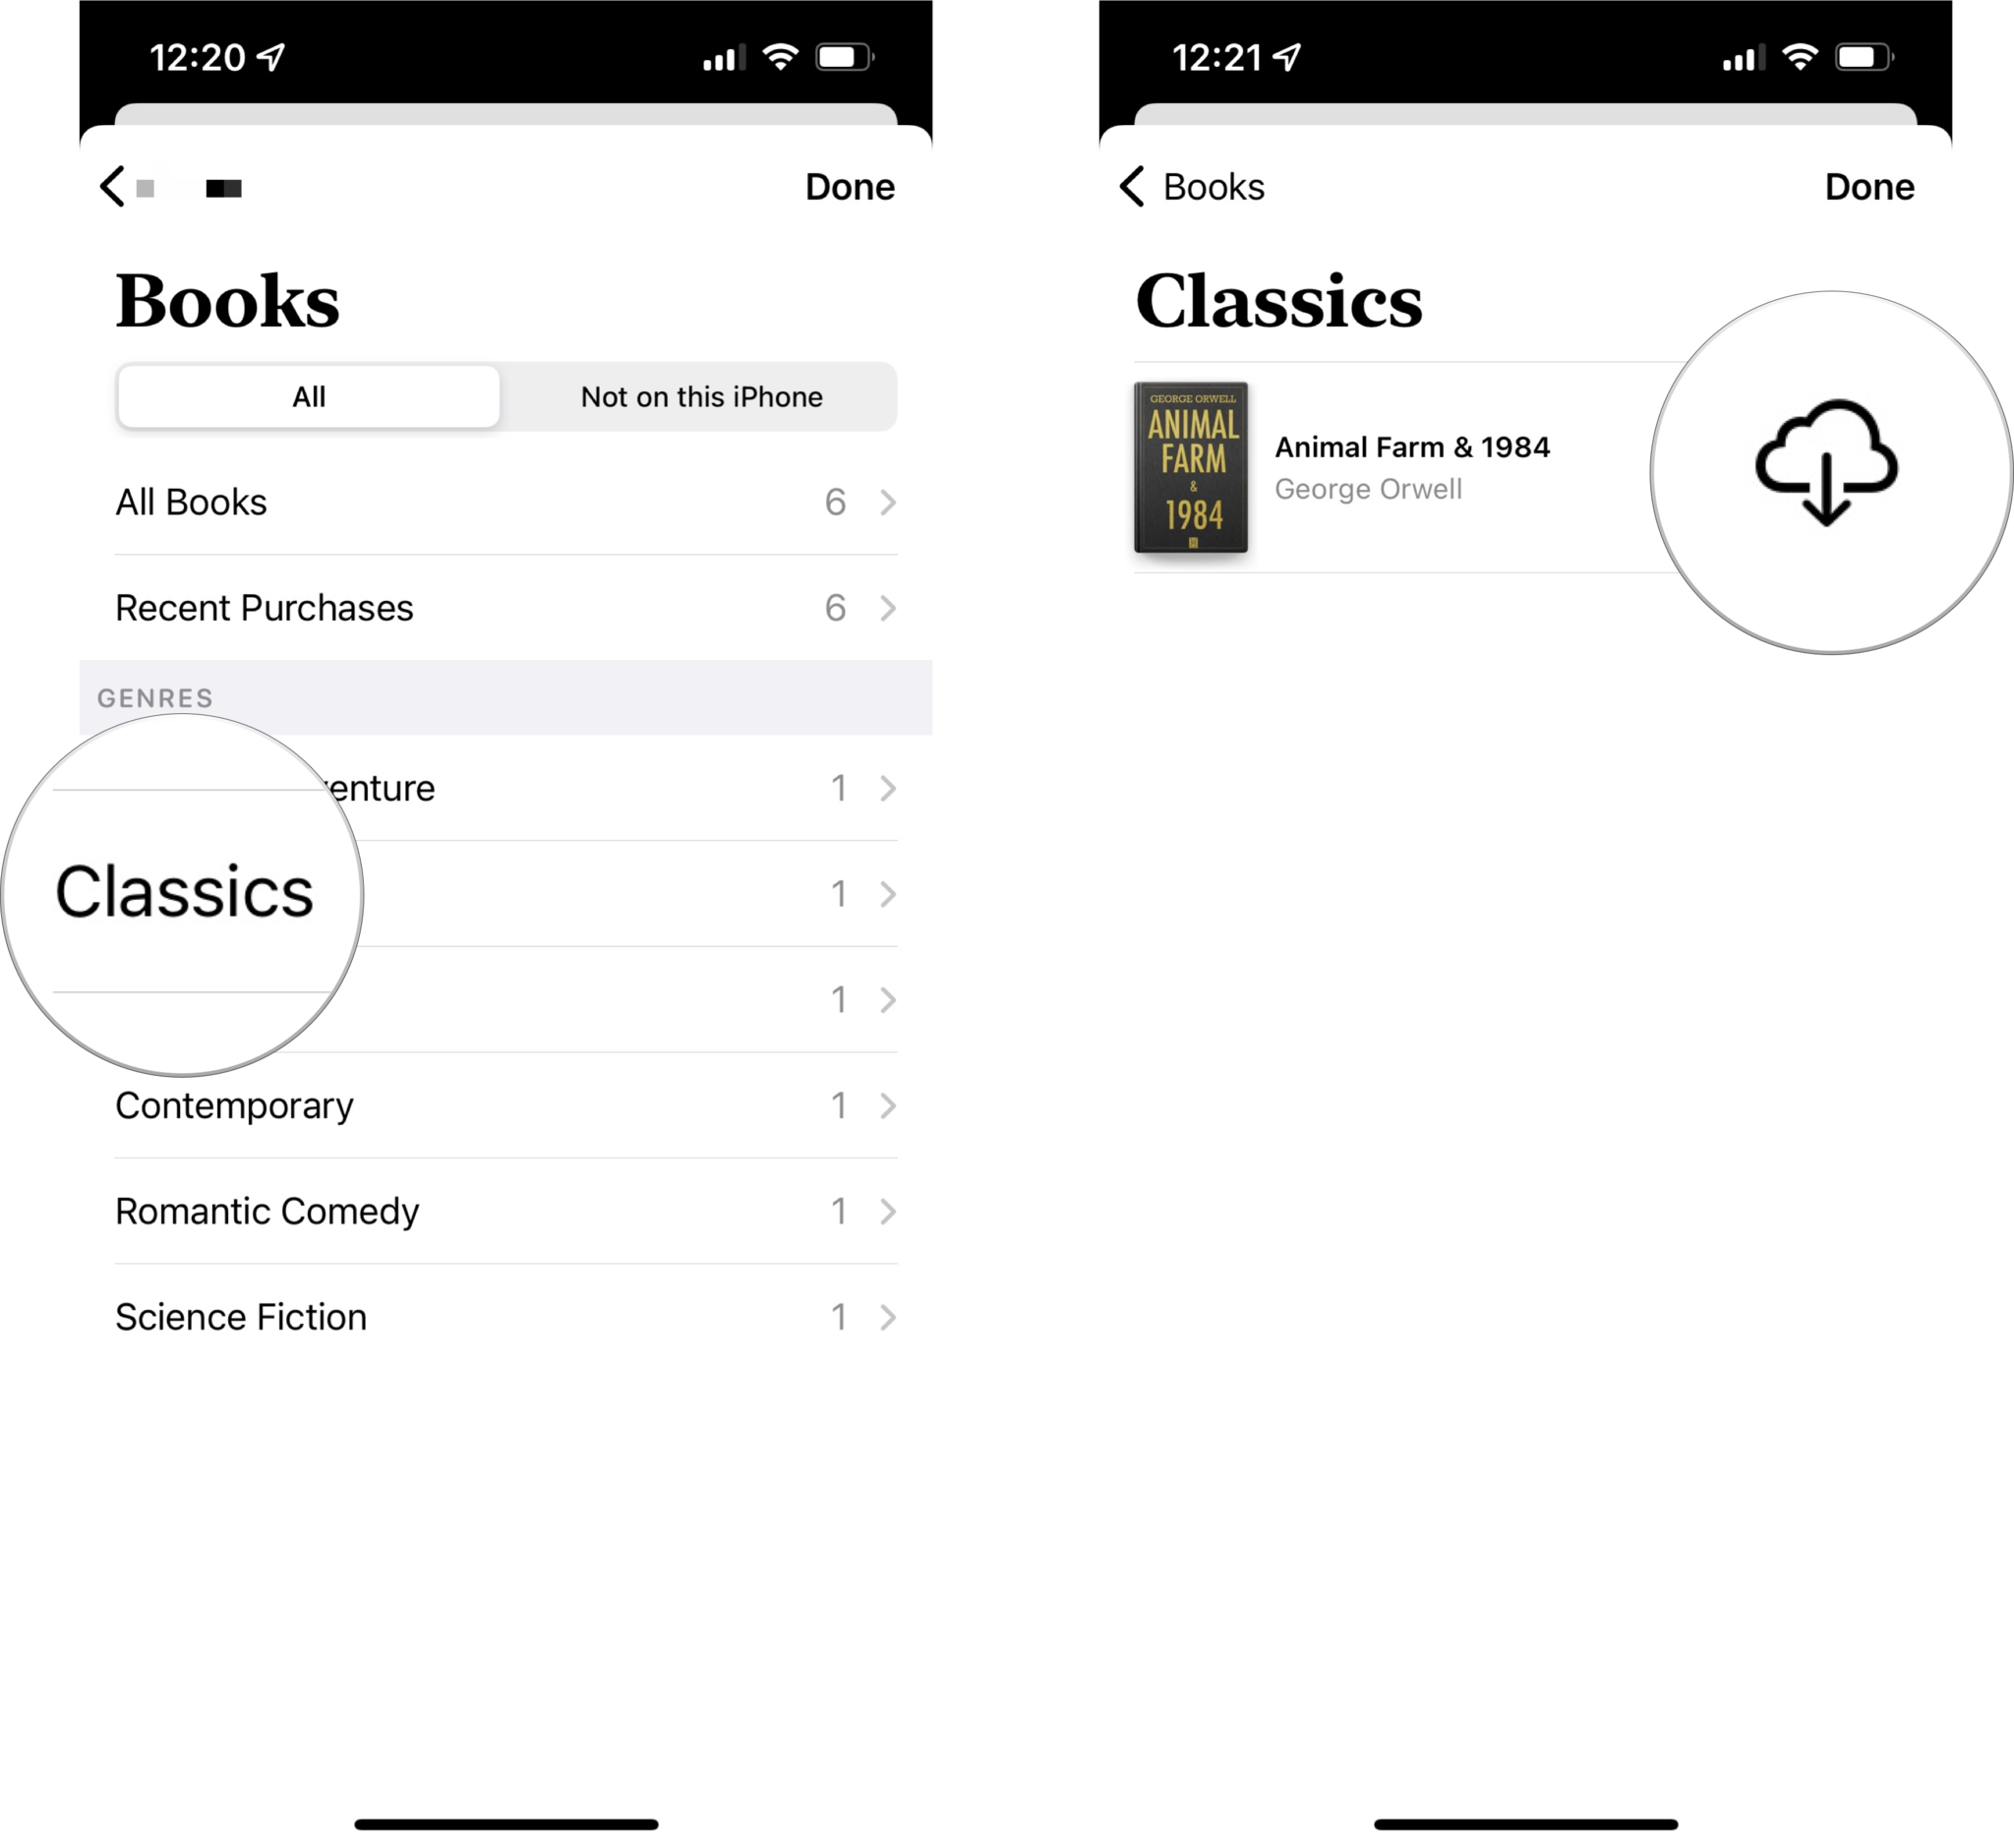 How to share a book in Apple Books with iCloud Family Sharing: Tap All Books or a genre, tap the download icon next to the book you want to add to your library